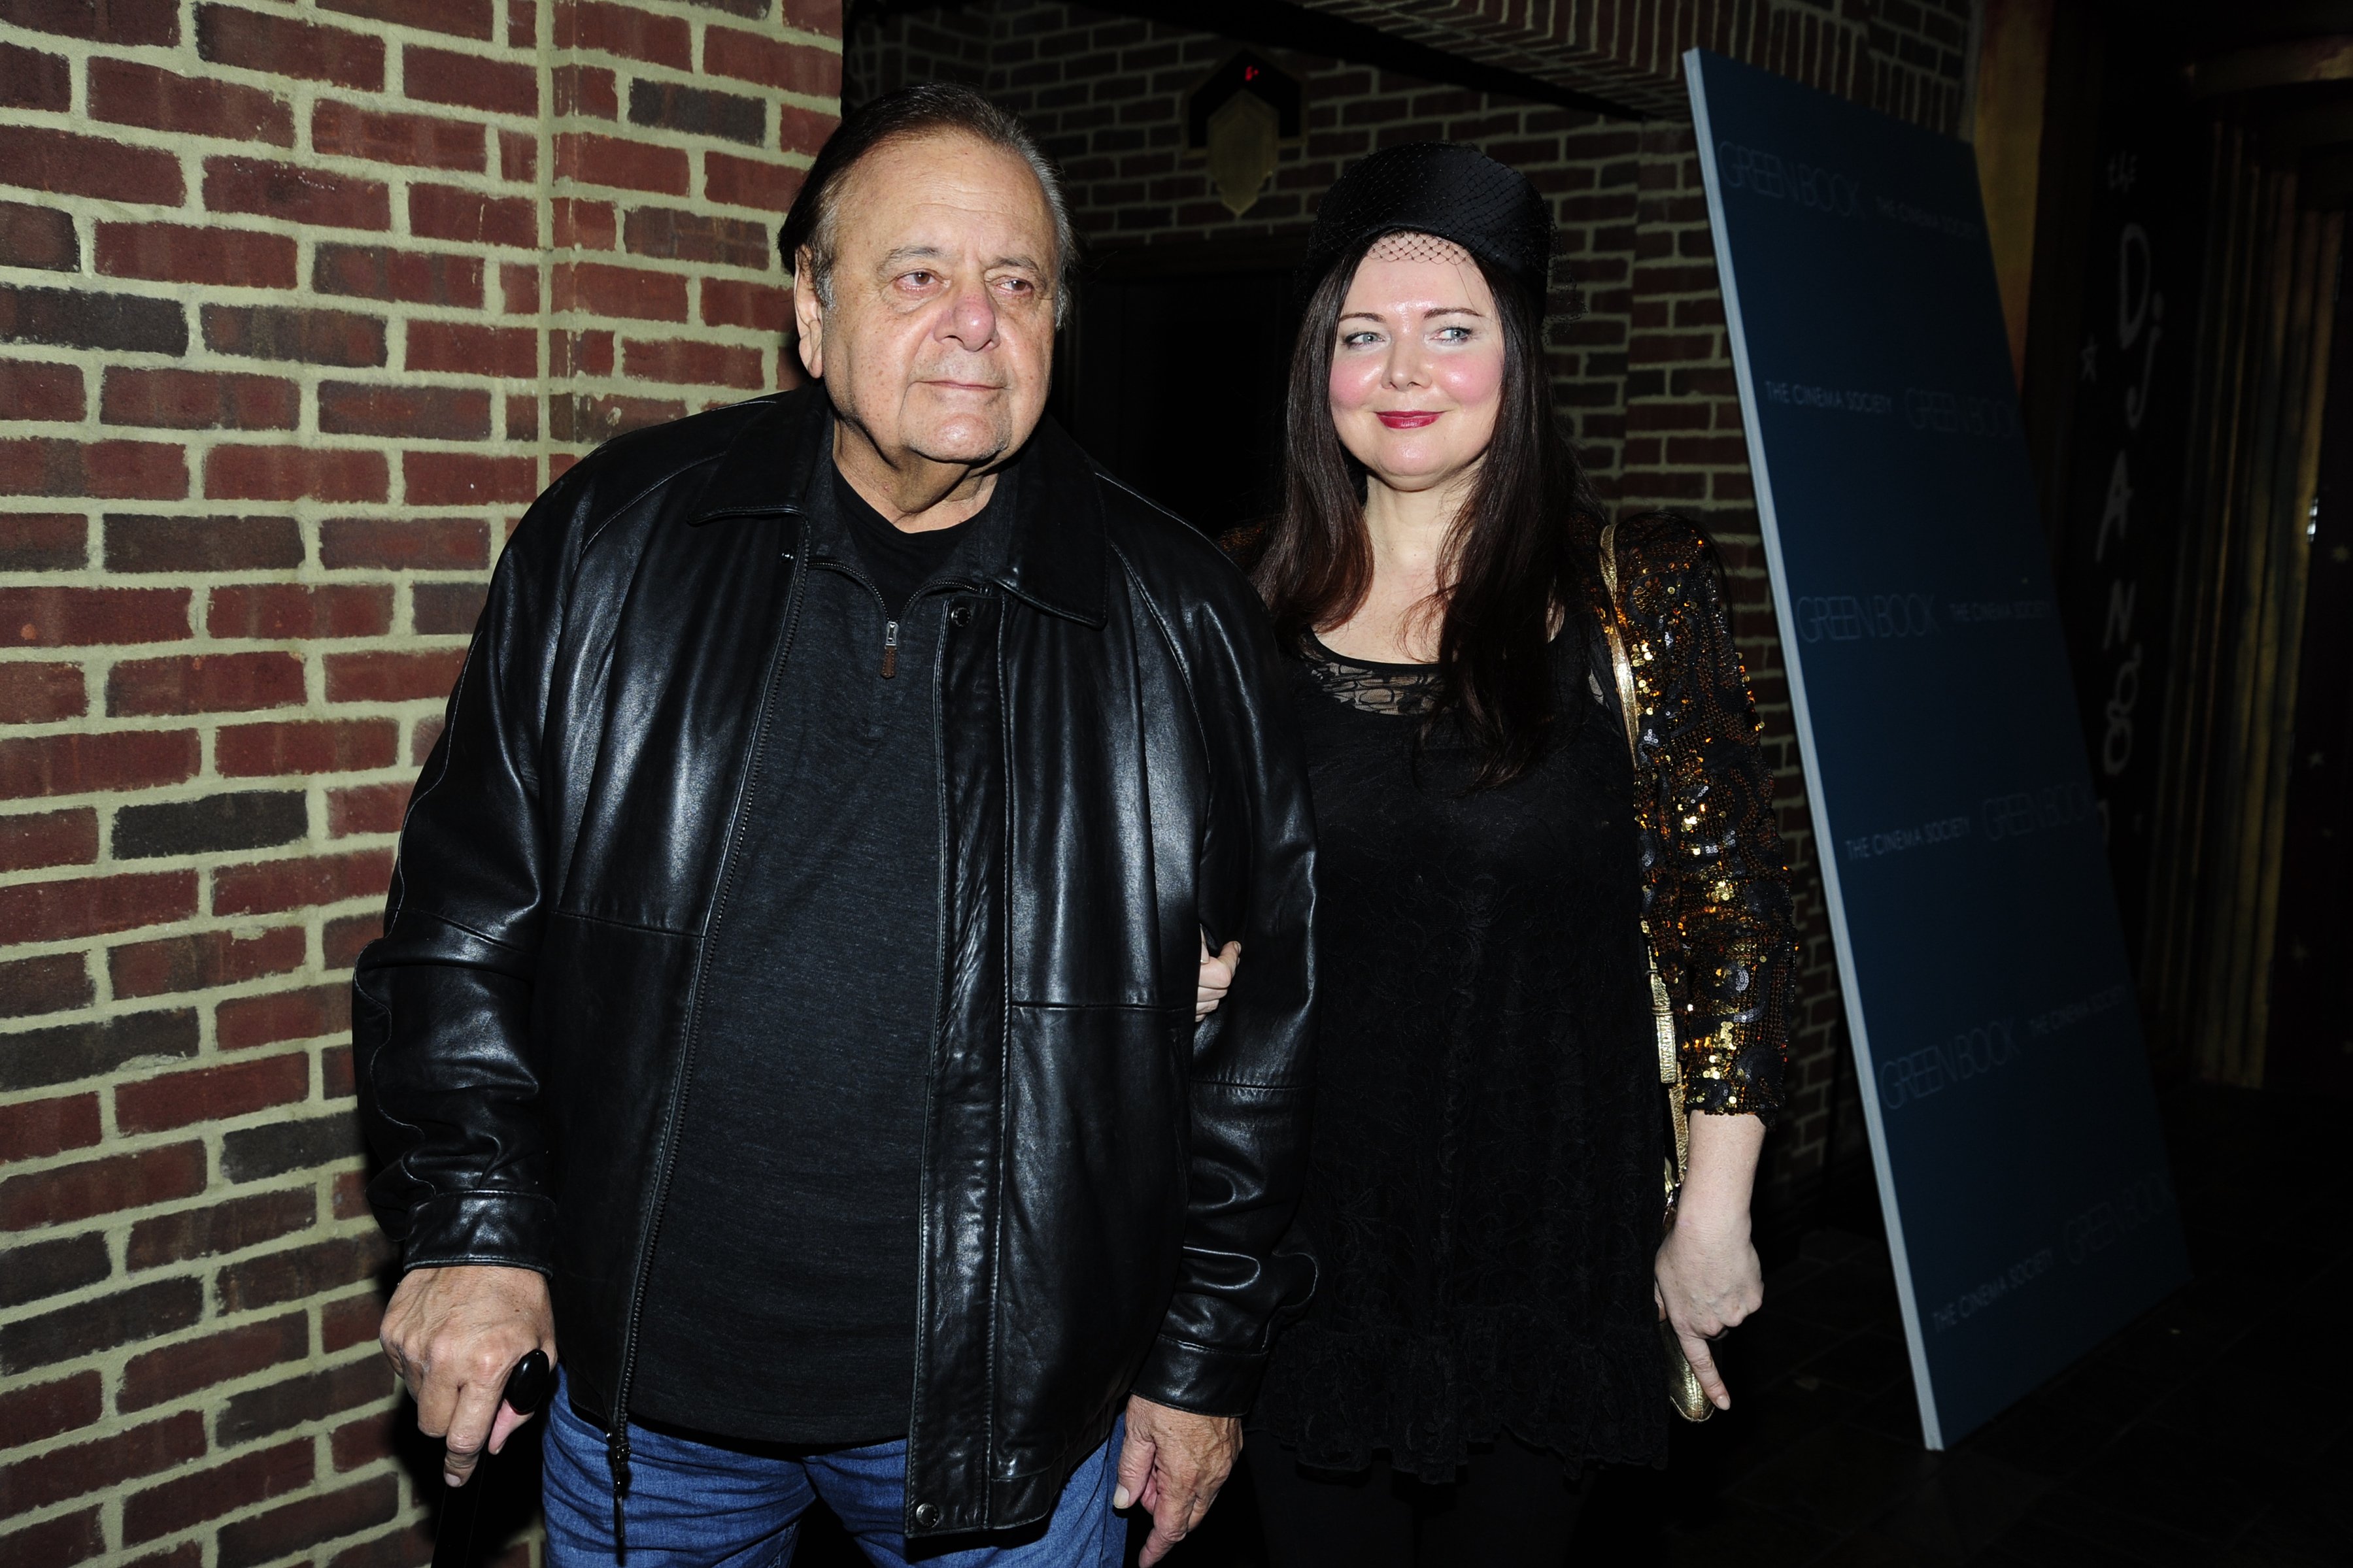 Paul Sorvino and Dee Dee Sorvino attends Universal Pictures With The Cinema Society Host A Special Screening Of "Green Book" at The Roxy Cinema, NYC on November 14, 2018 in New York City. | Source: Getty Images 